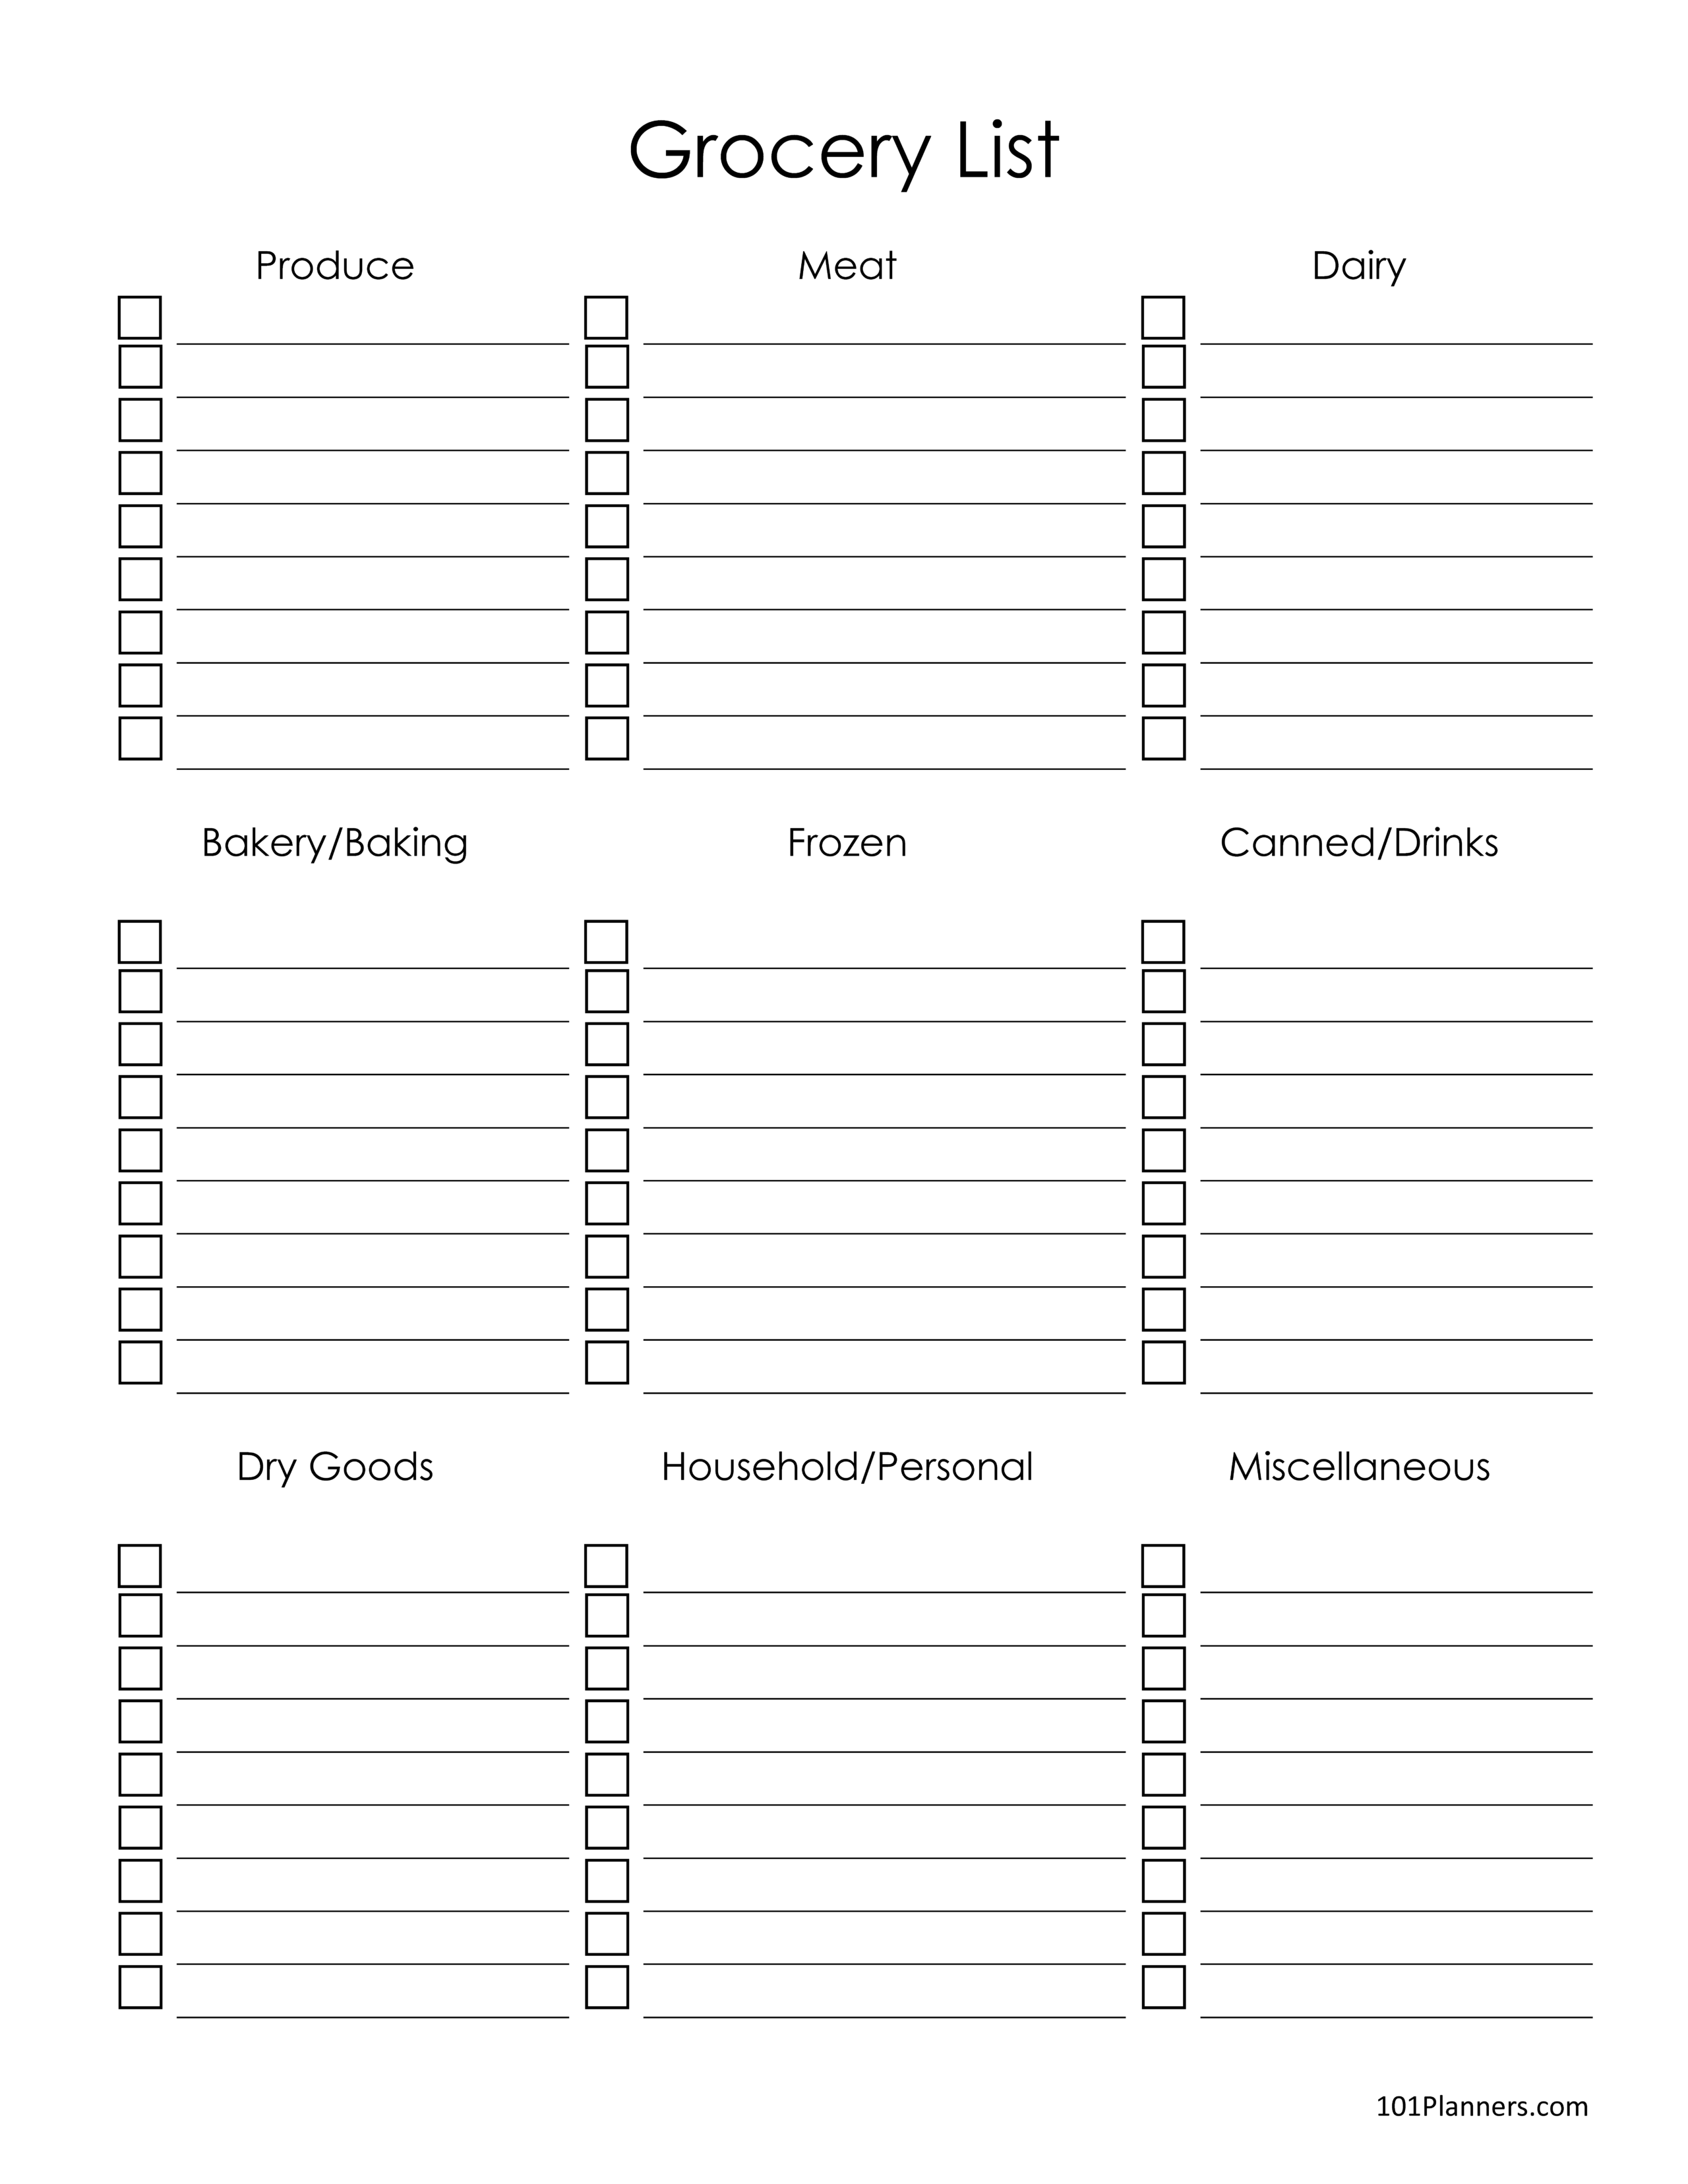 printable-grocery-list-template-blank-shopping-list-grocery-list